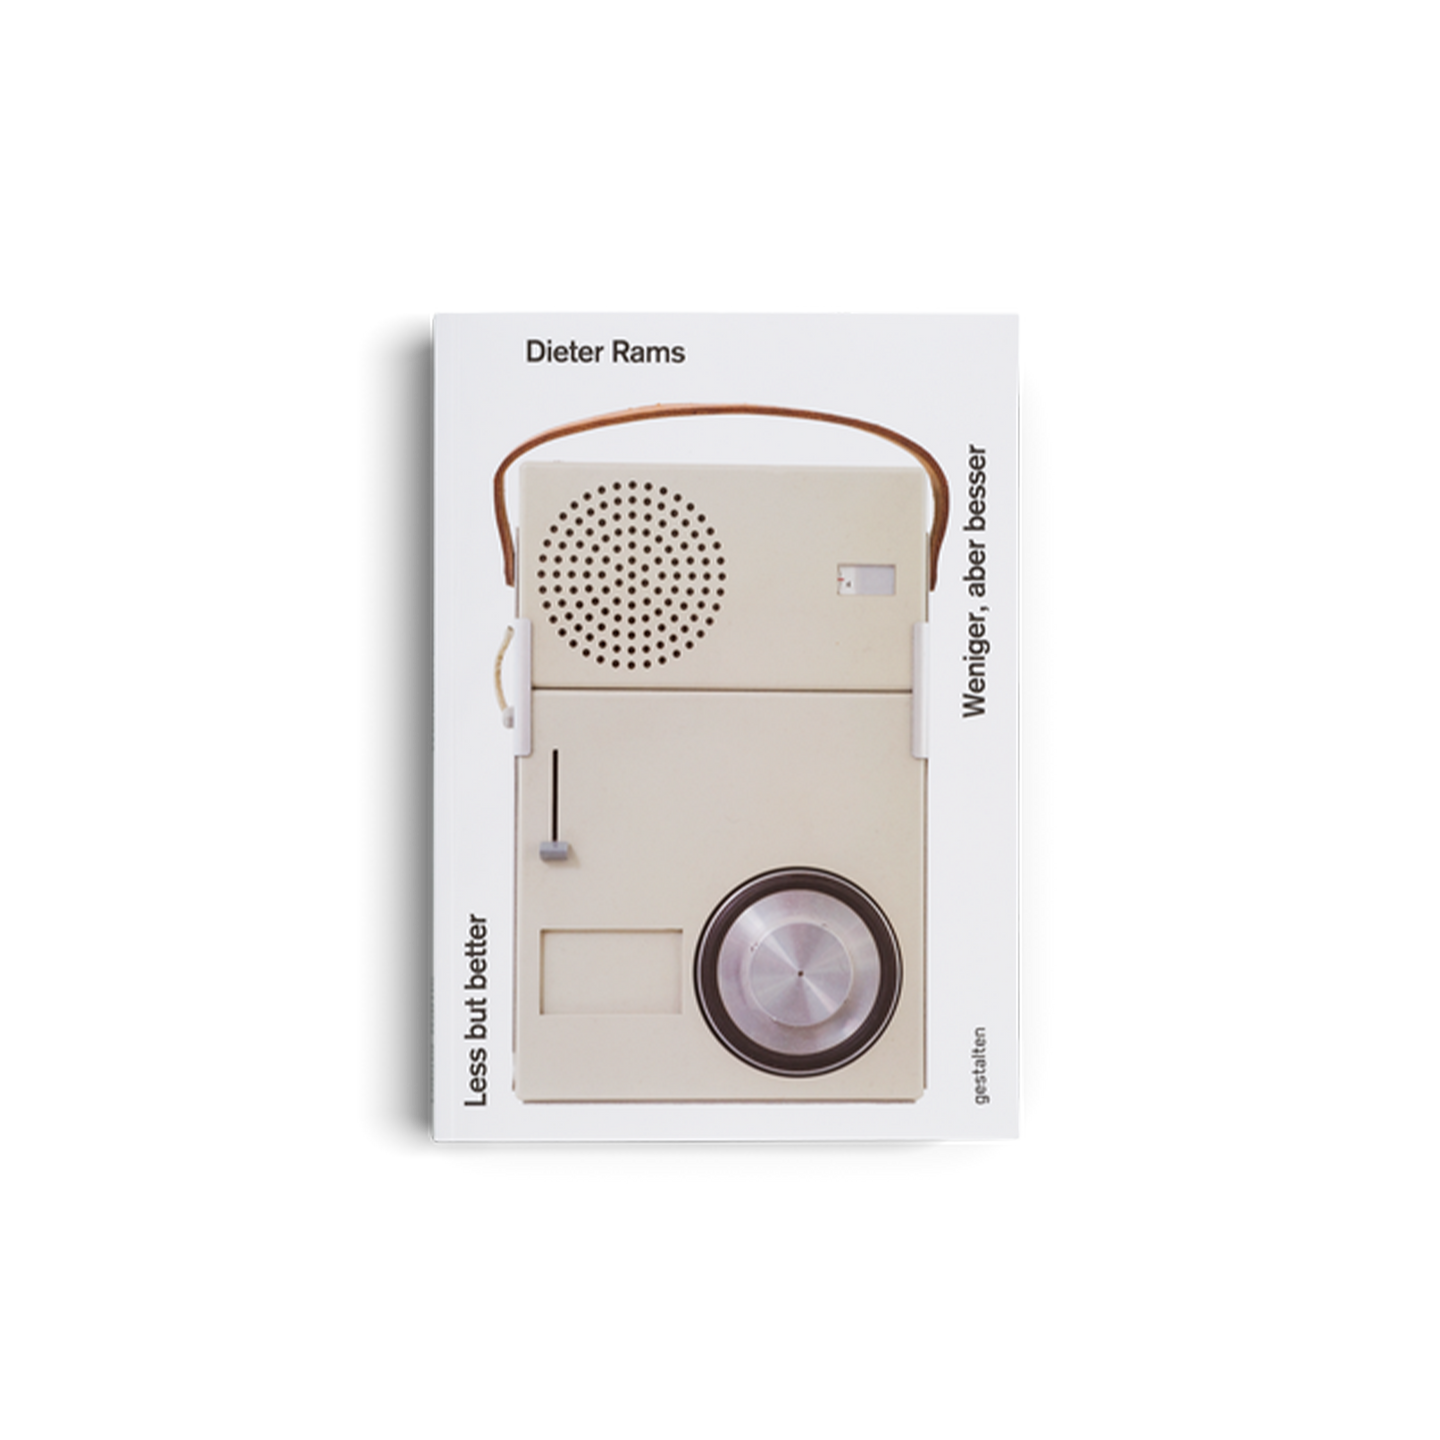 Less but better by Dieter Rams